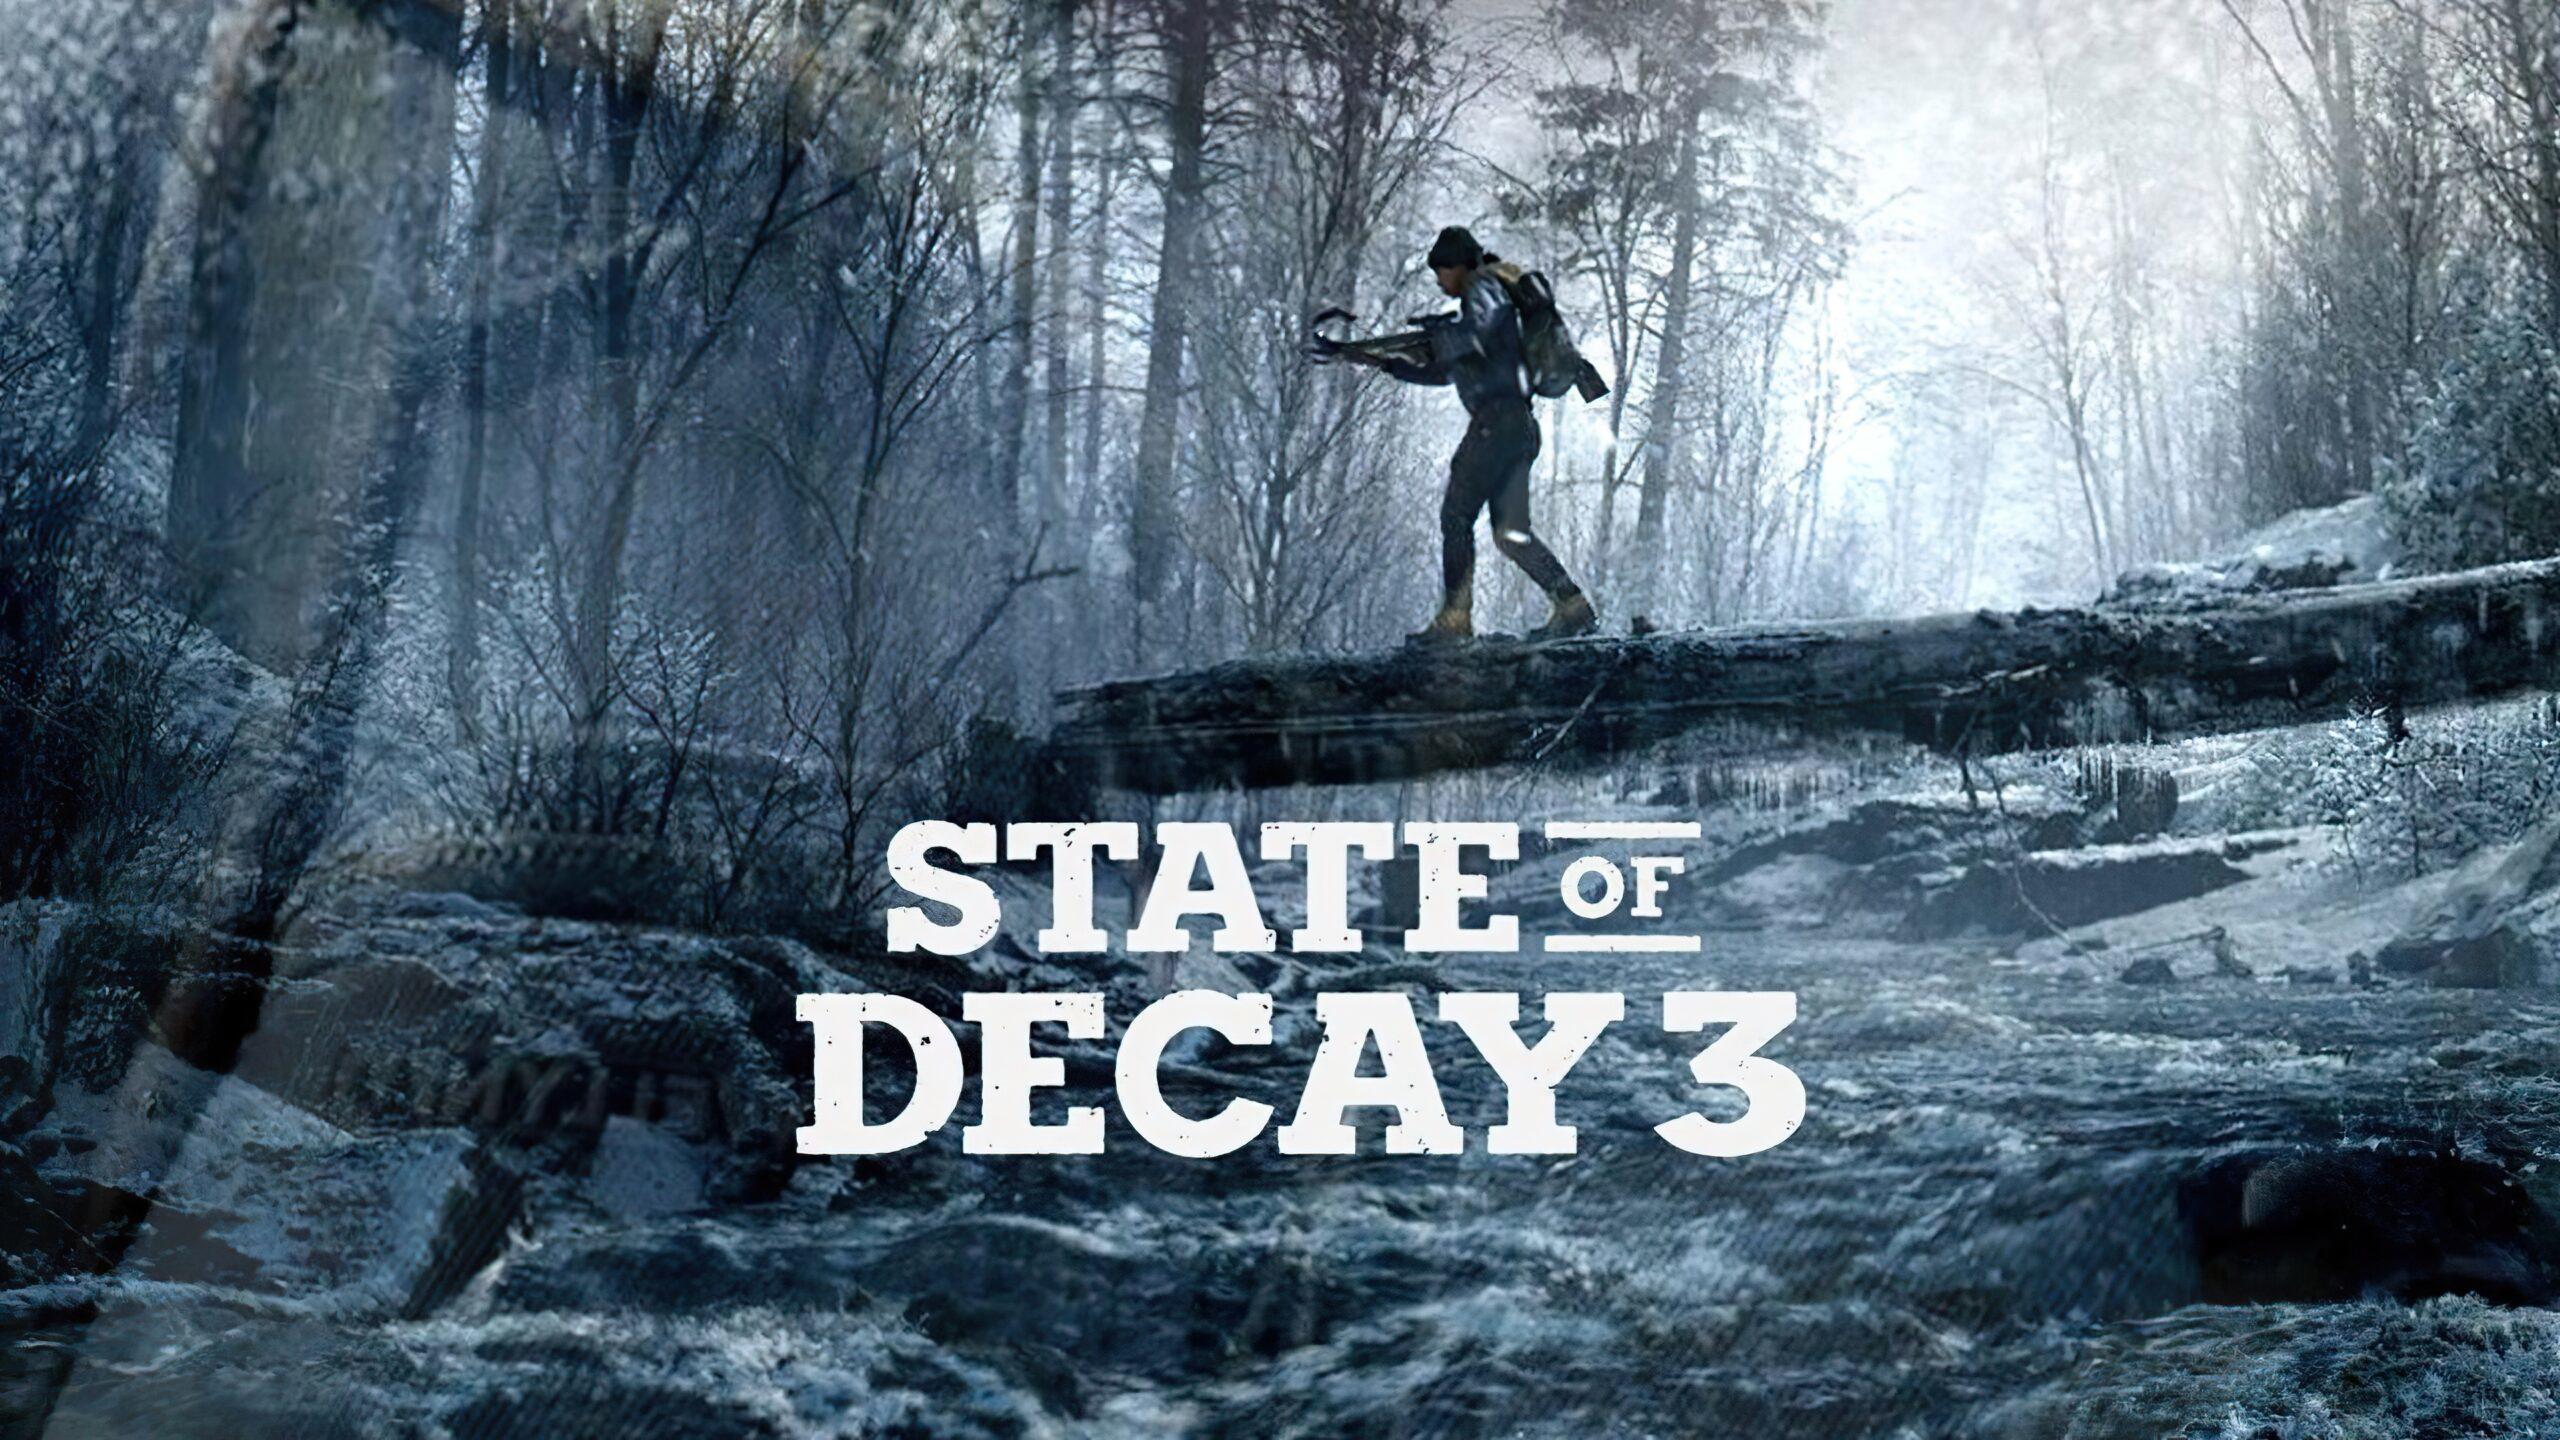 State of Decay 3 is scheduled for 2027